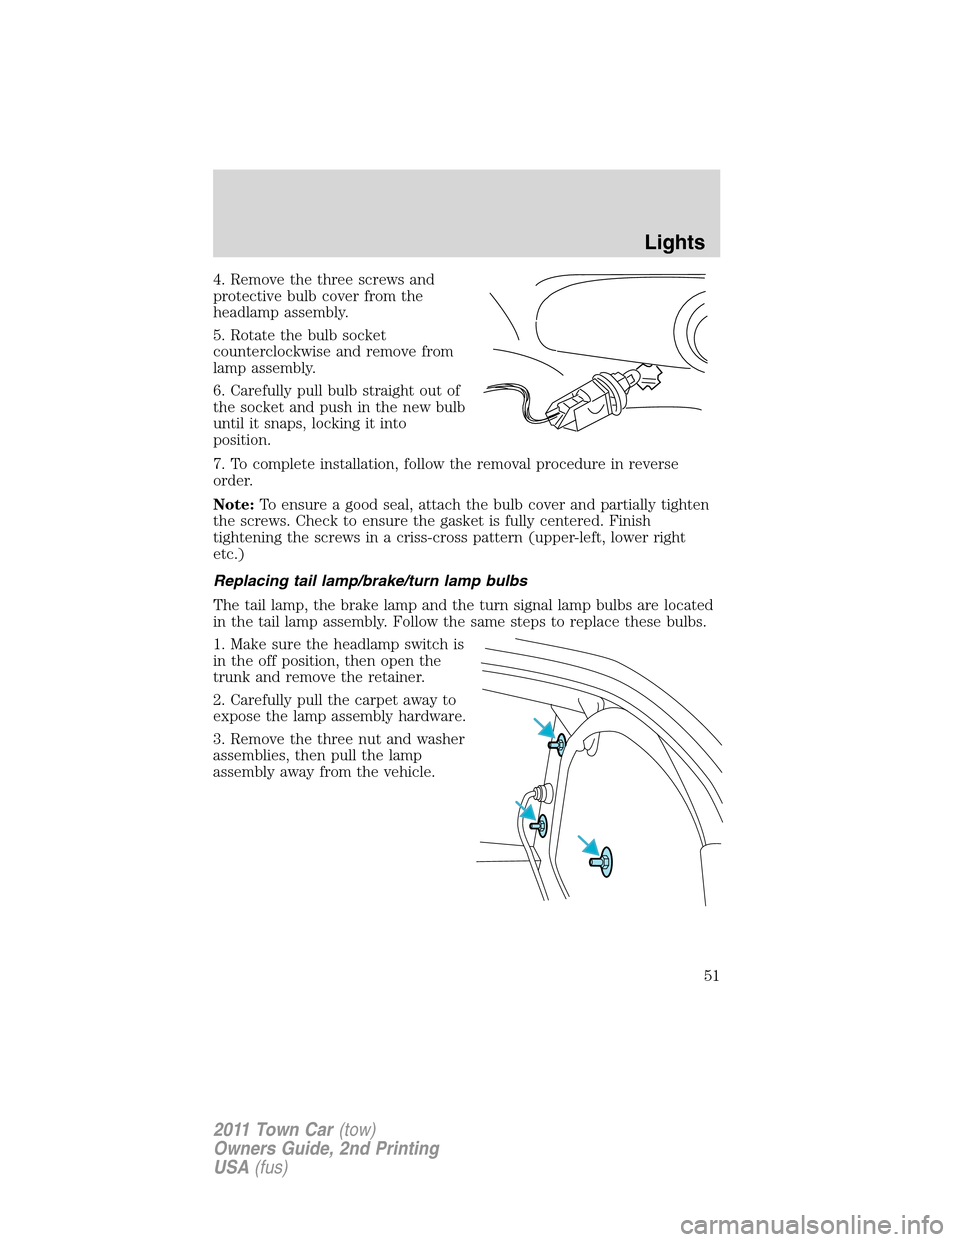 LINCOLN TOWN CAR 2011  Owners Manual 4. Remove the three screws and
protective bulb cover from the
headlamp assembly.
5. Rotate the bulb socket
counterclockwise and remove from
lamp assembly.
6. Carefully pull bulb straight out of
the so